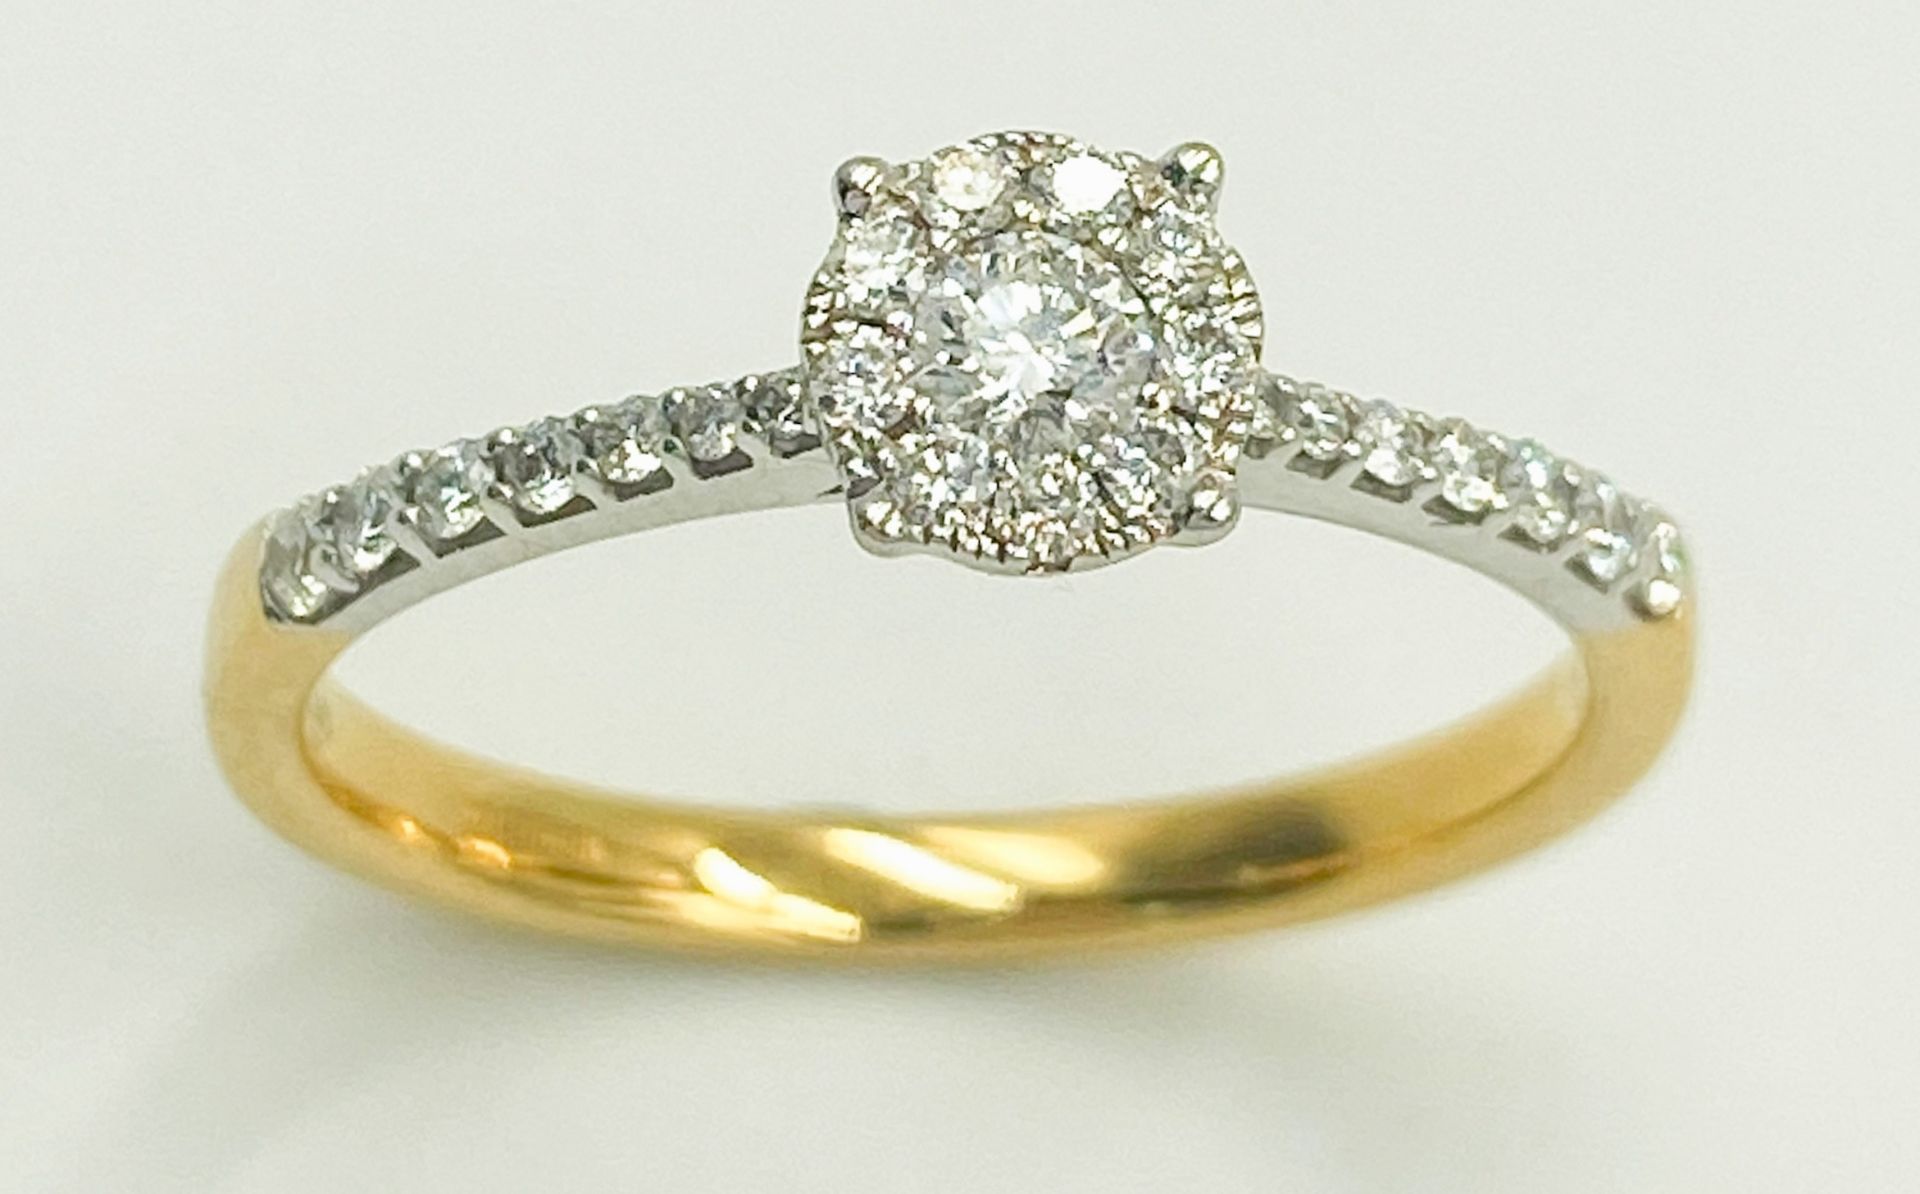 AN 18K YELLOW GOLD DIAMOND RING - 0.30CT. 2.5G. SIZE N. - Image 3 of 6